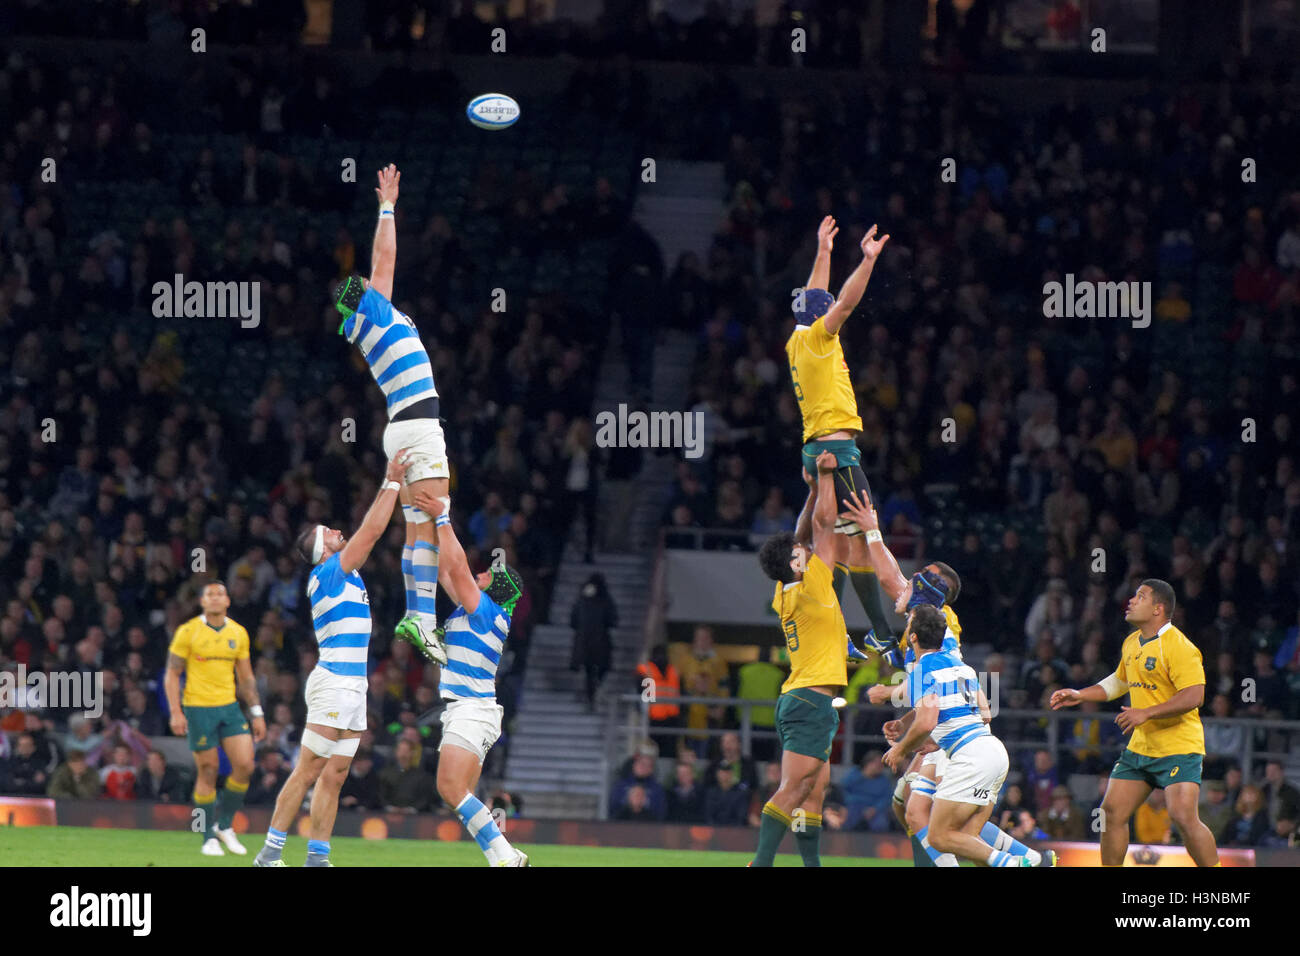 Players jumps for a lineout ball during the rugby union test match between Argentian Pumas and Australian Wallabies